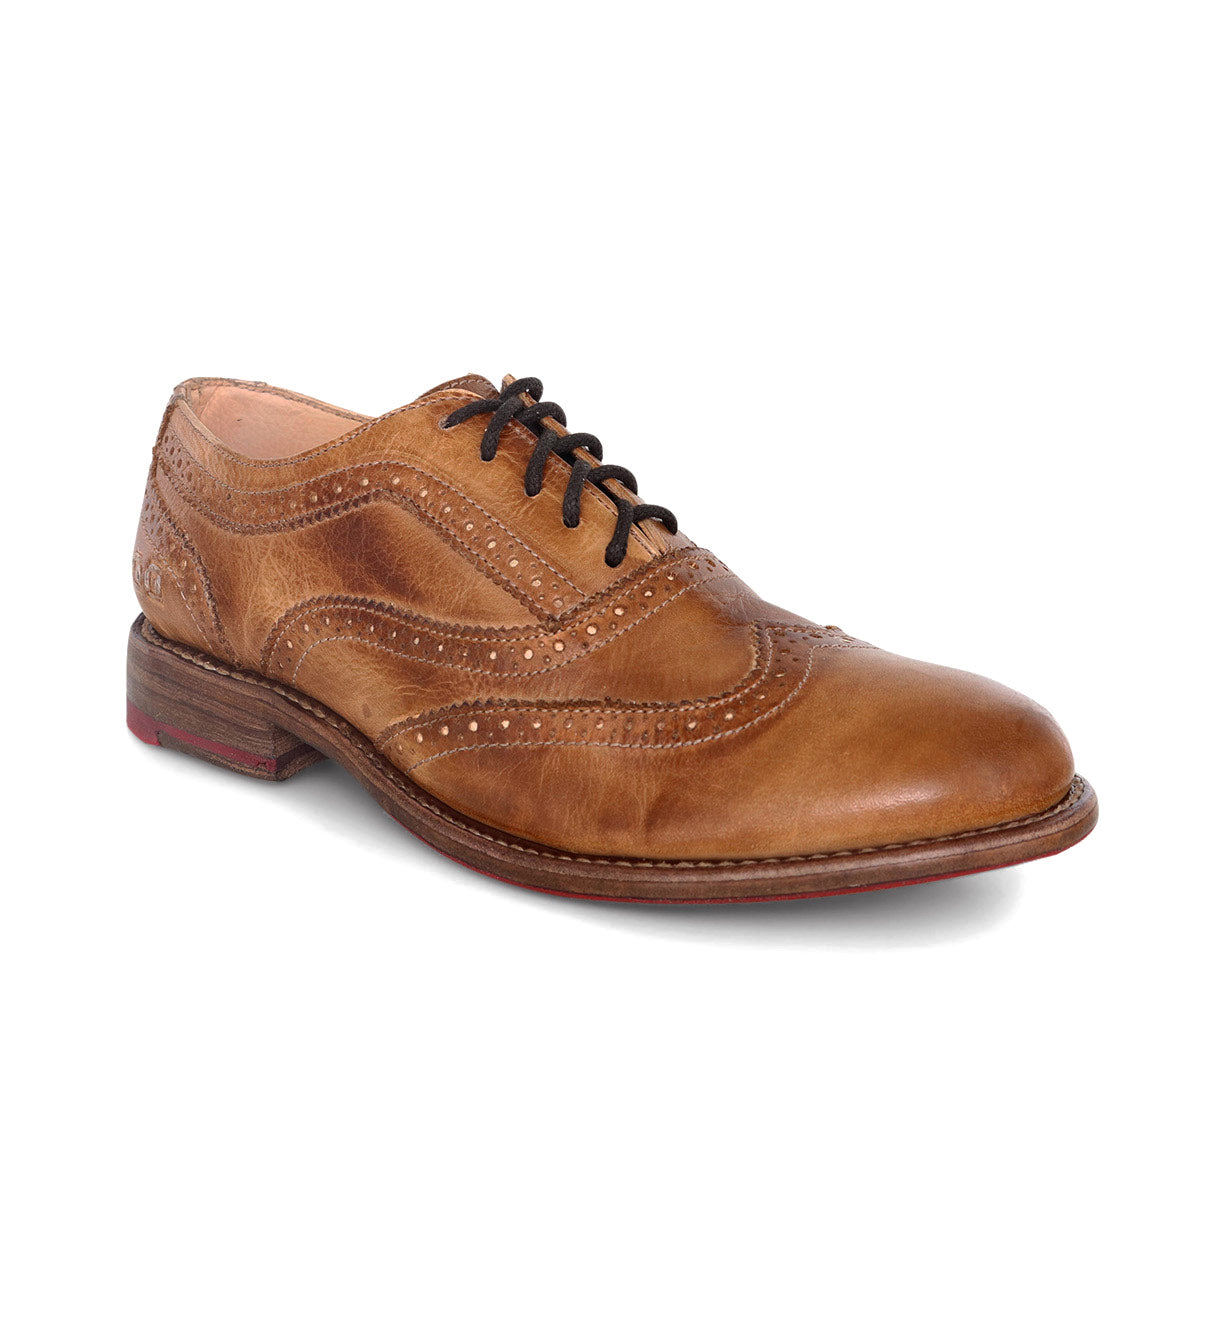 A tan wingtip oxford shoe, called the Lita by Bed Stu.